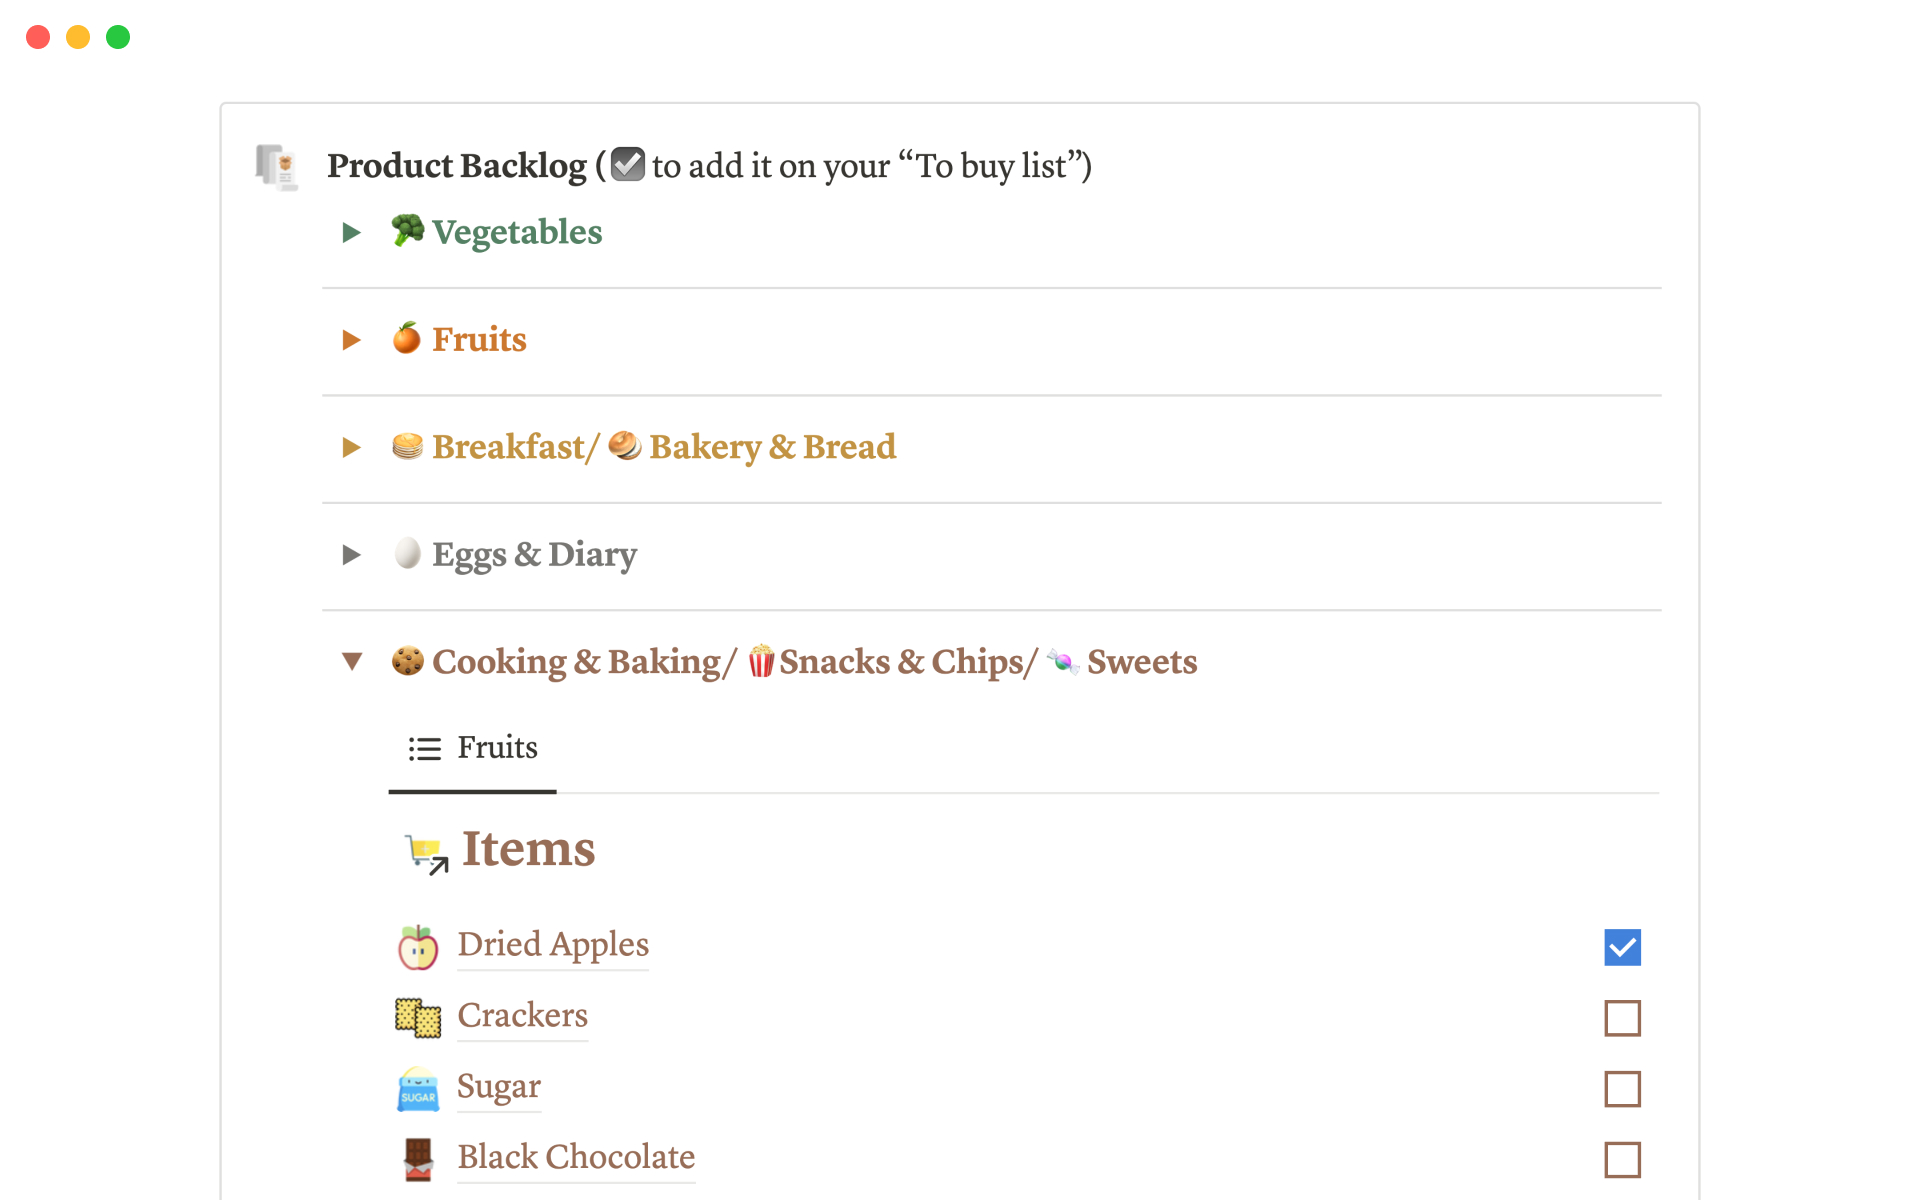 Quickly make a grocery list by checking off items you need to buy.